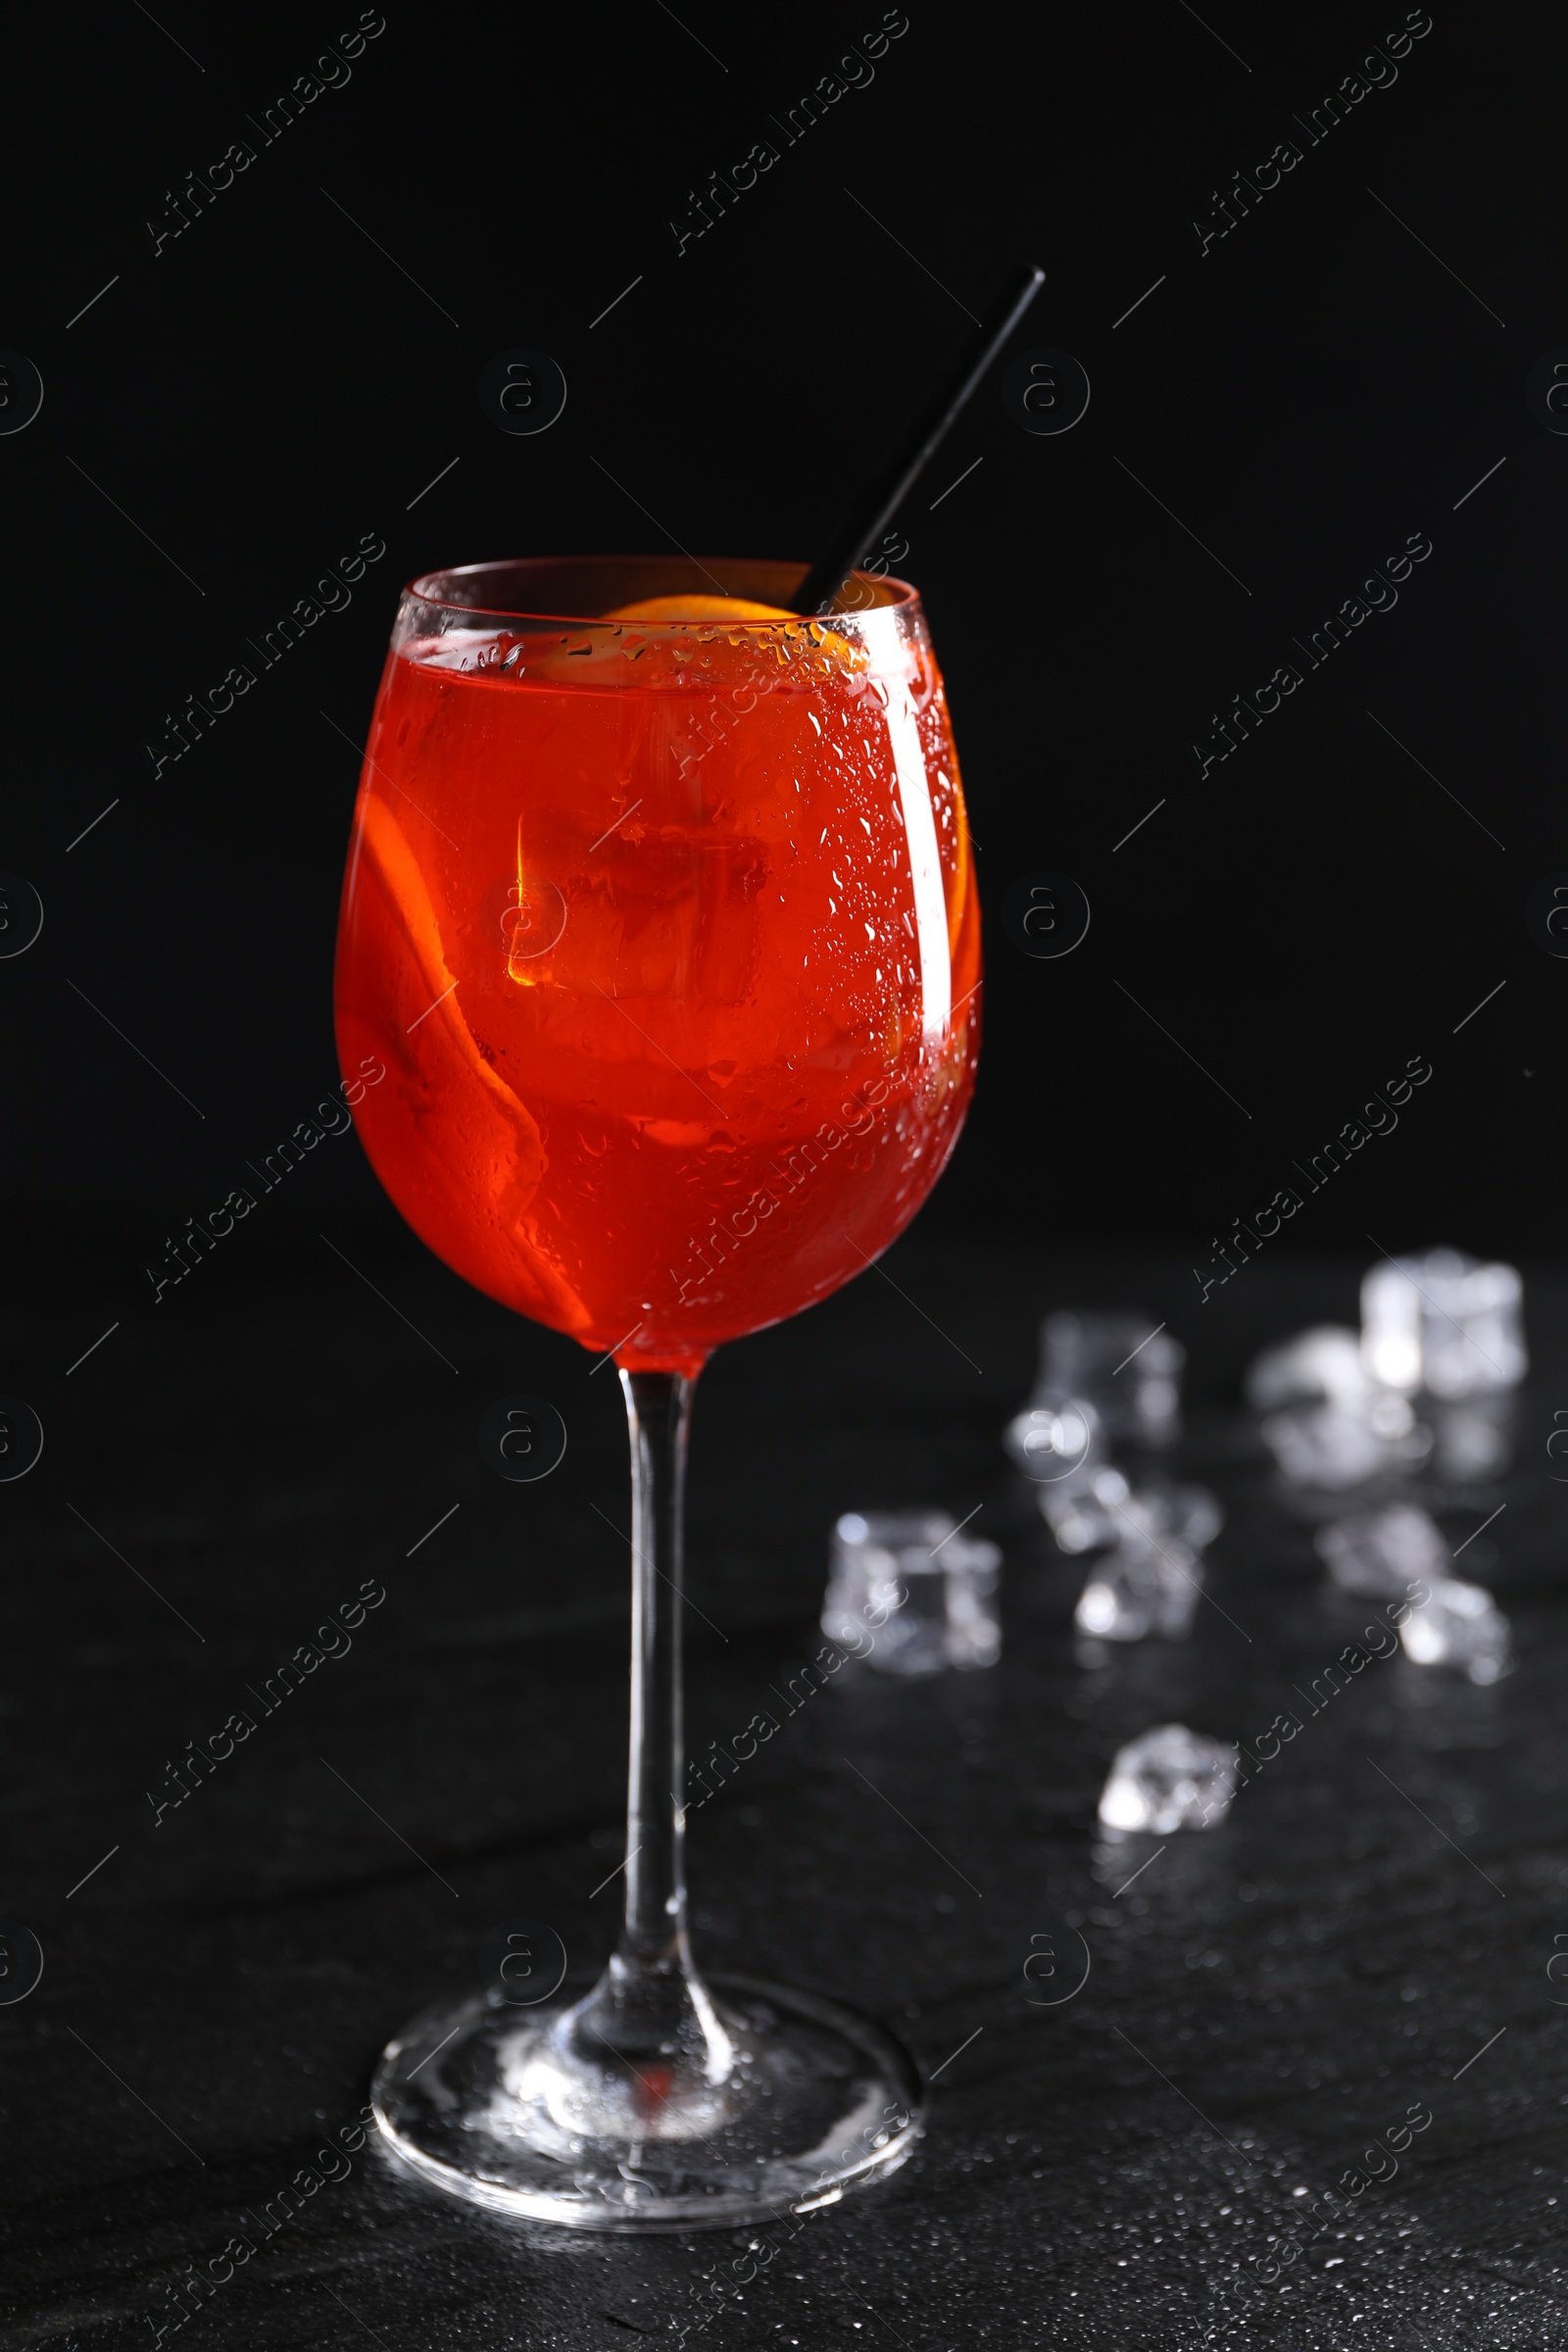 Photo of Glass of tasty Aperol spritz cocktail with orange slices and ice cubes on table against black background